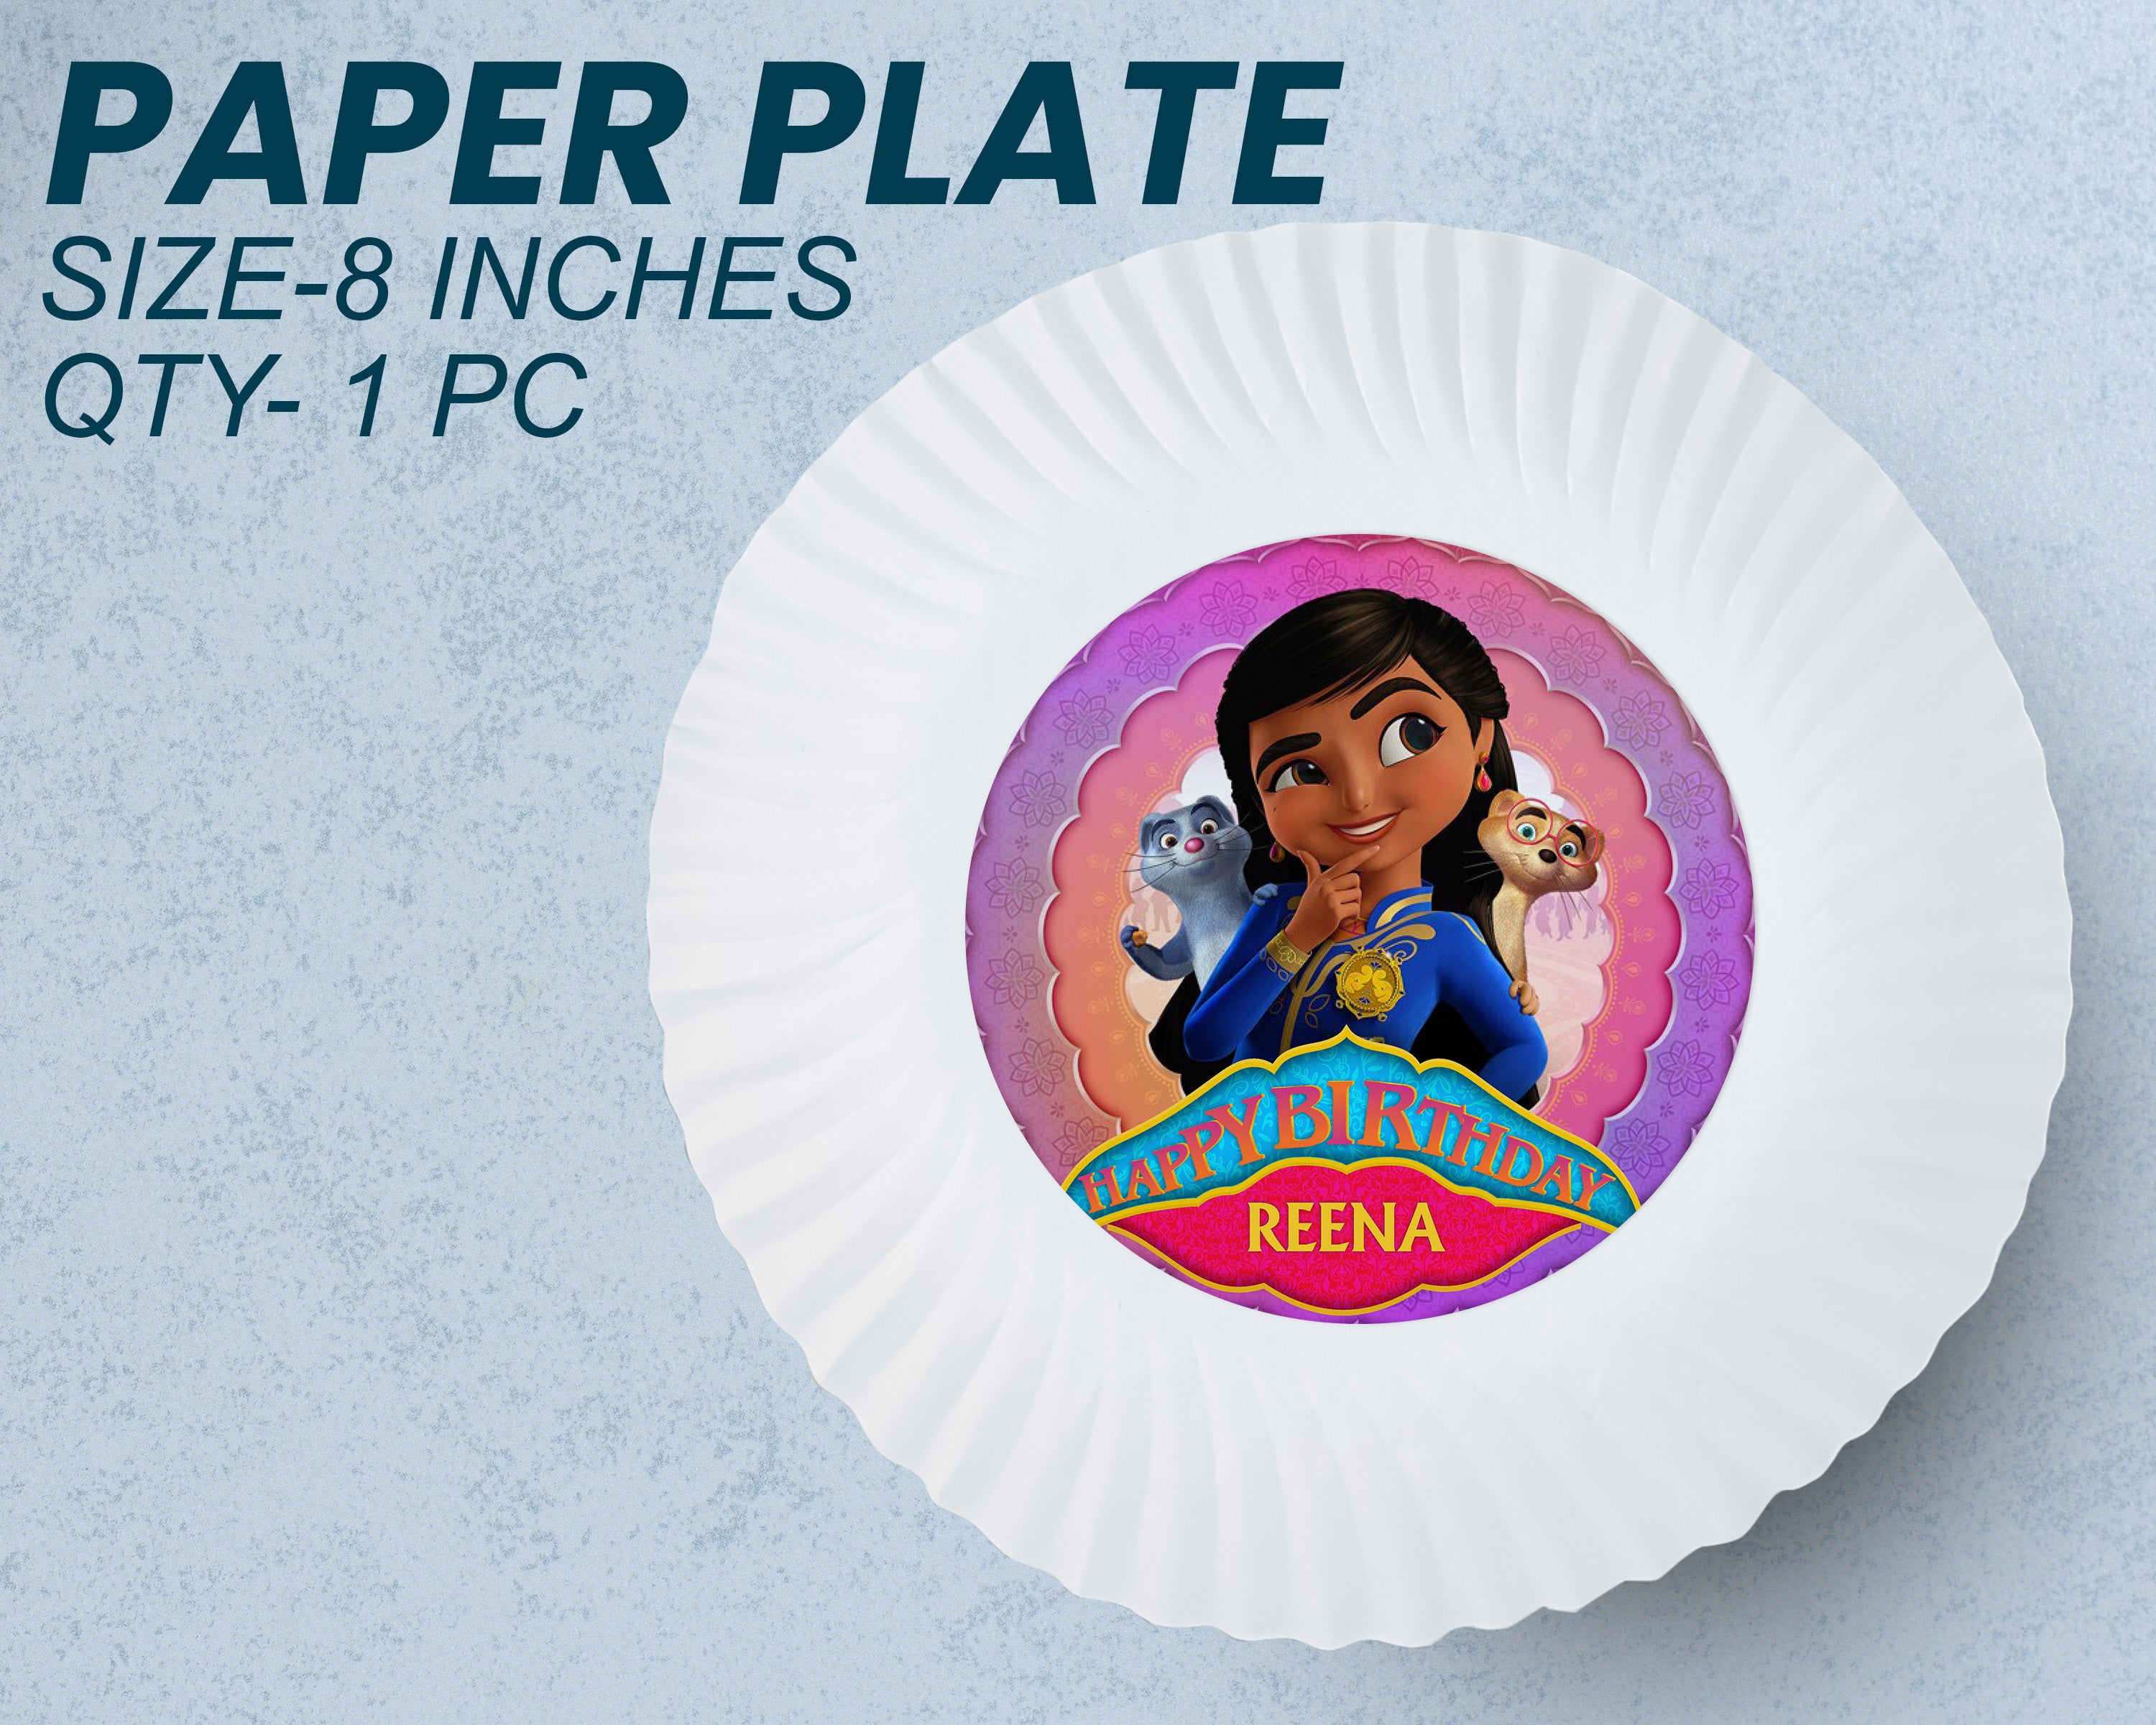 PSI Mira the Royal Detective Theme Party Cups and Plates Combo